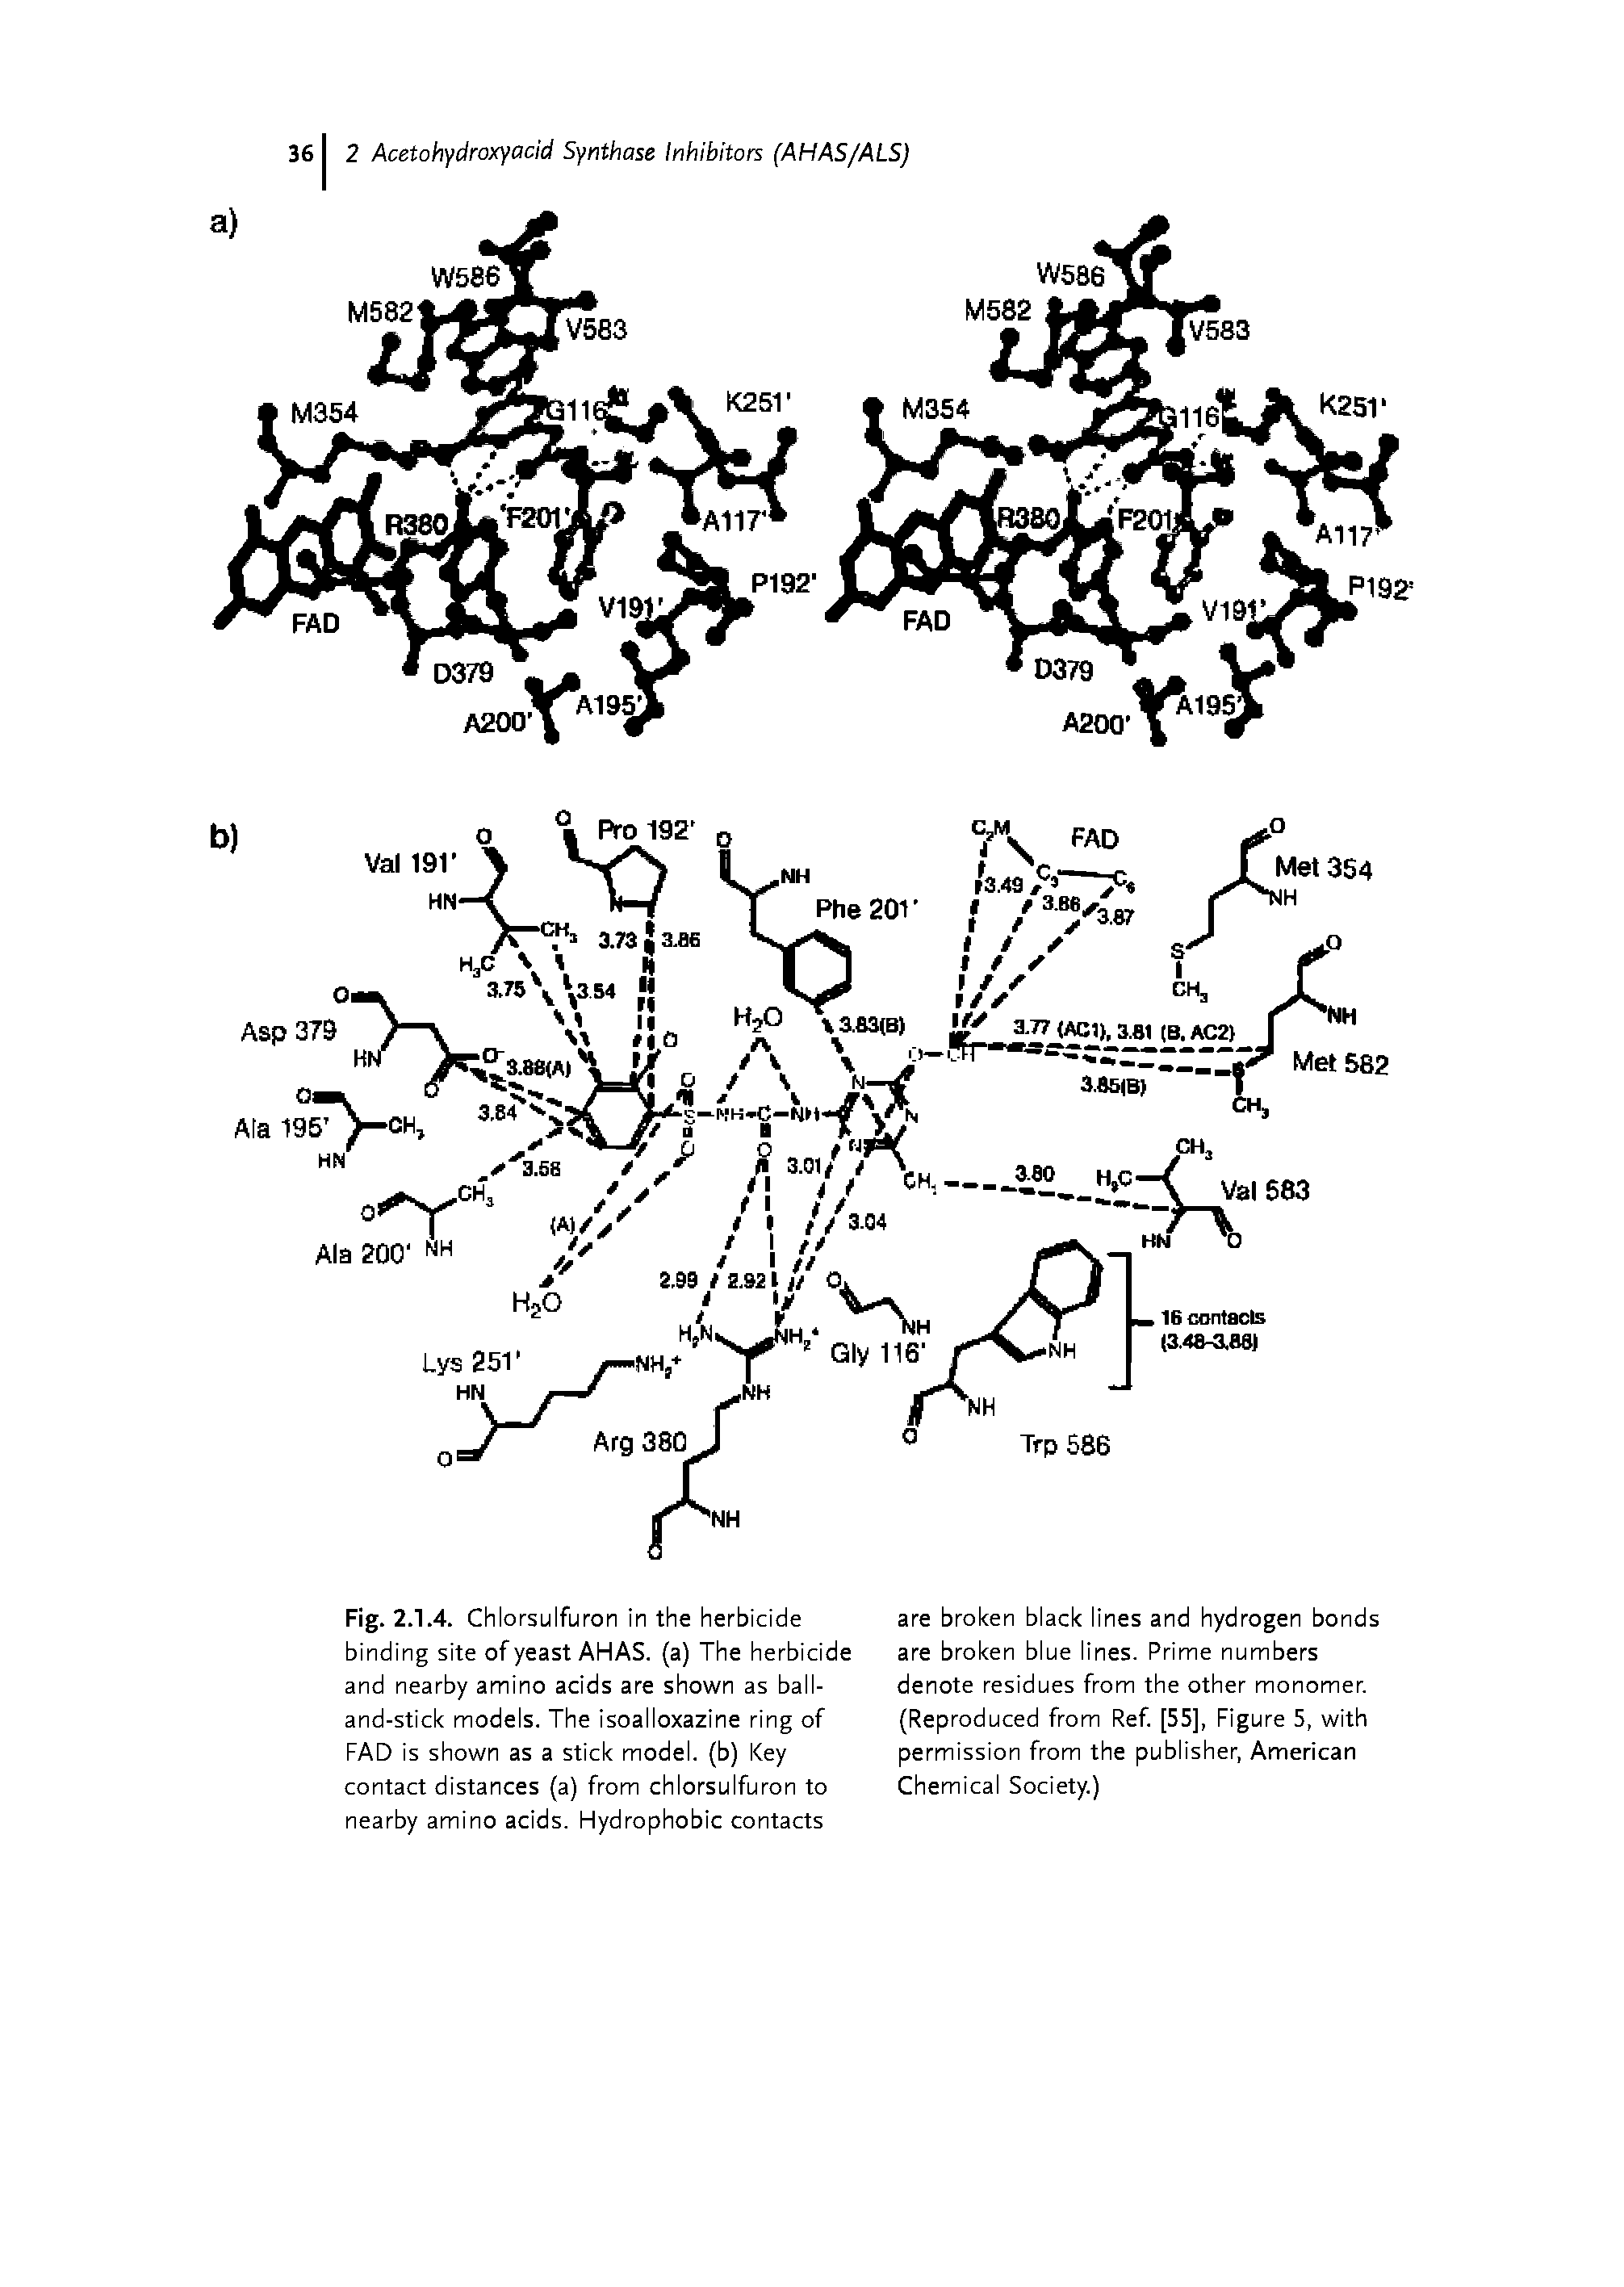 Fig. 2.1.4. Chlorsulfuron in the herbicide binding site of yeast AHAS. (a) The herbicide and nearby amino acids are shown as ball-and-stick models. The isoalloxazine ring of FAD is shown as a stick model, (b) Key contact distances (a) from chlorsulfuron to nearby amino acids. Hydrophobic contacts...